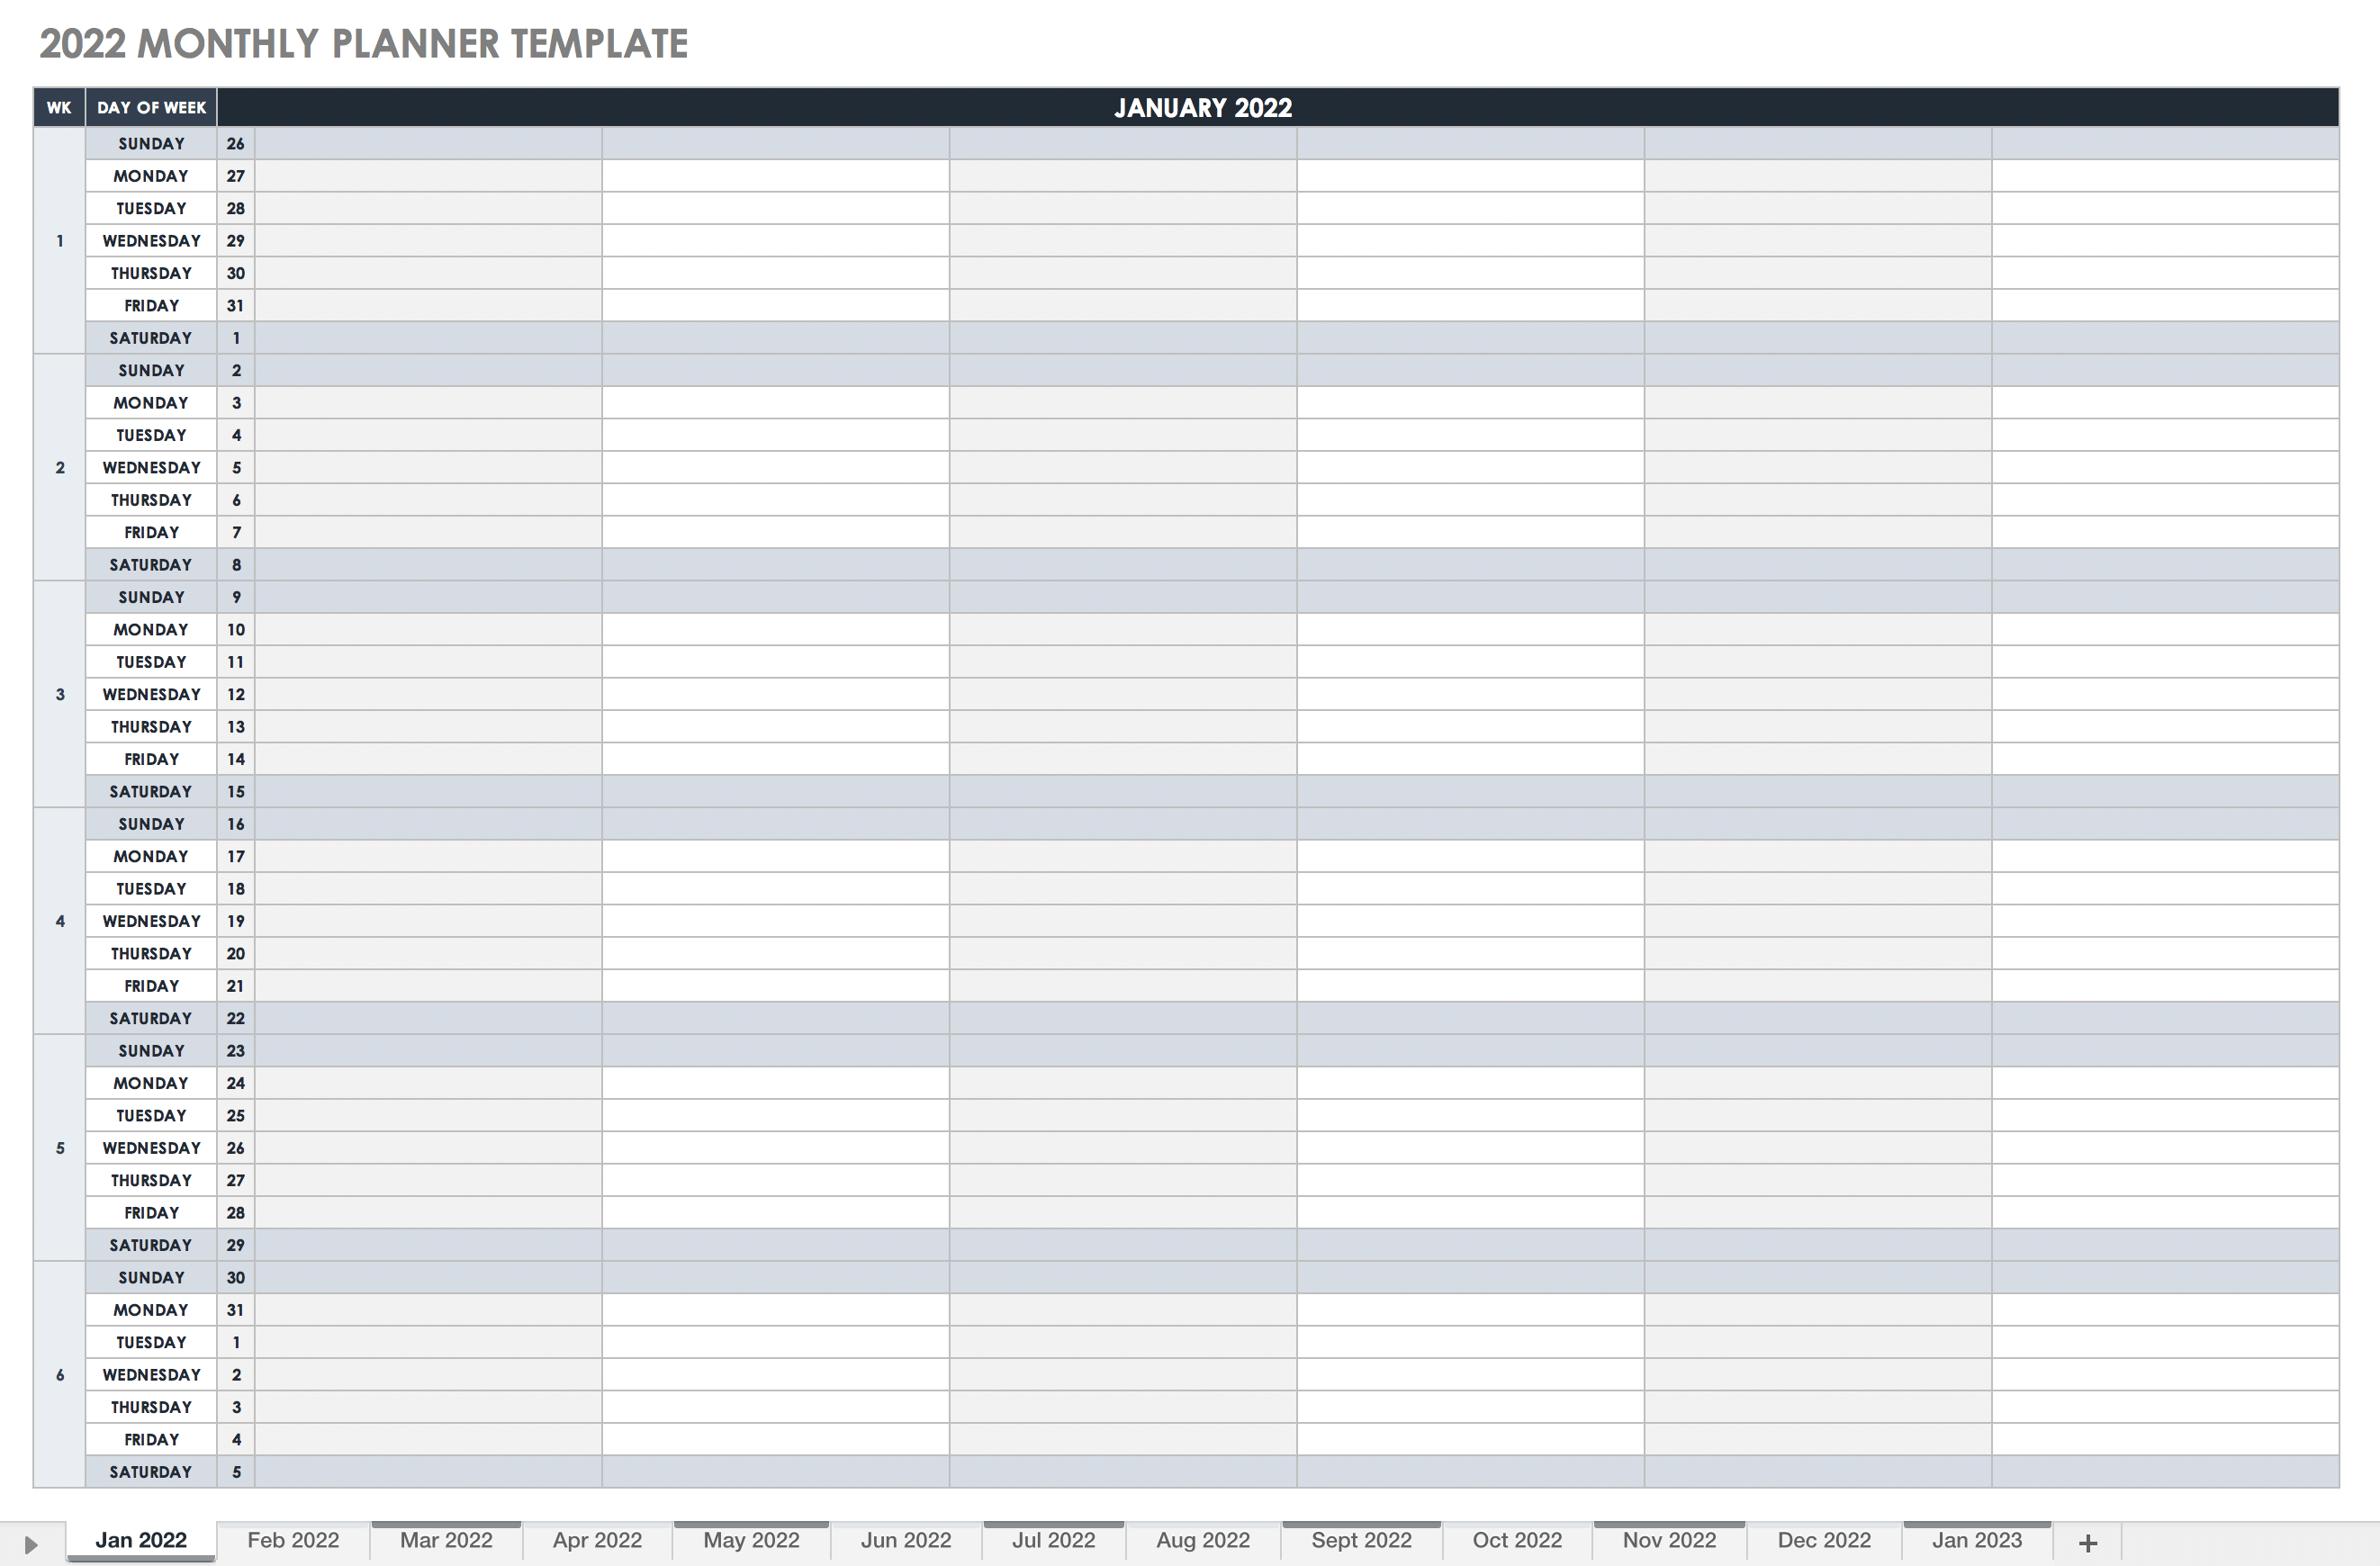 2022 Monthly Planner Template 